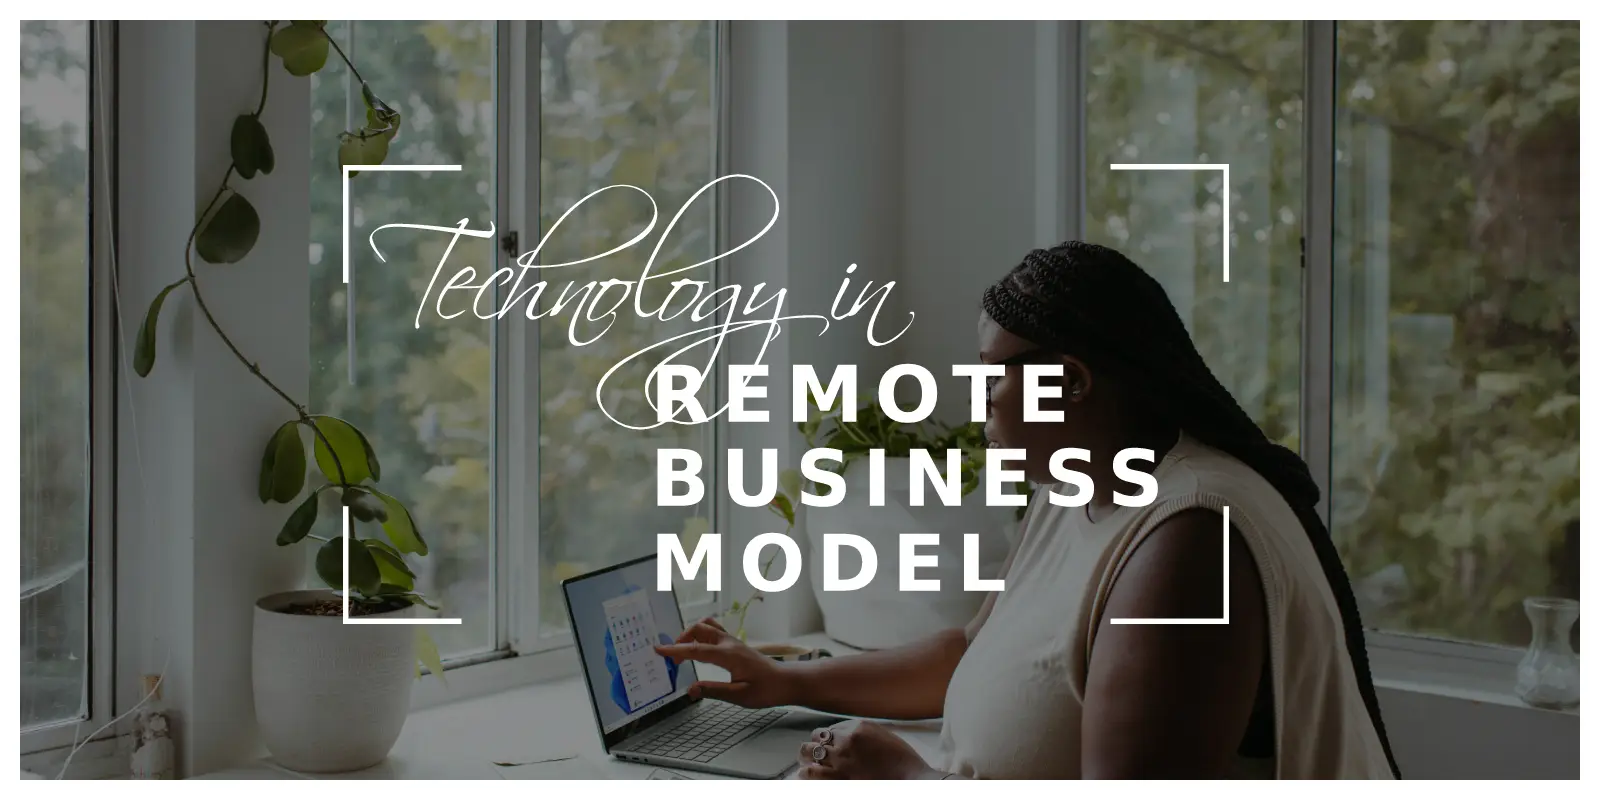 The Role of Technology in a Successful Remote Business Model